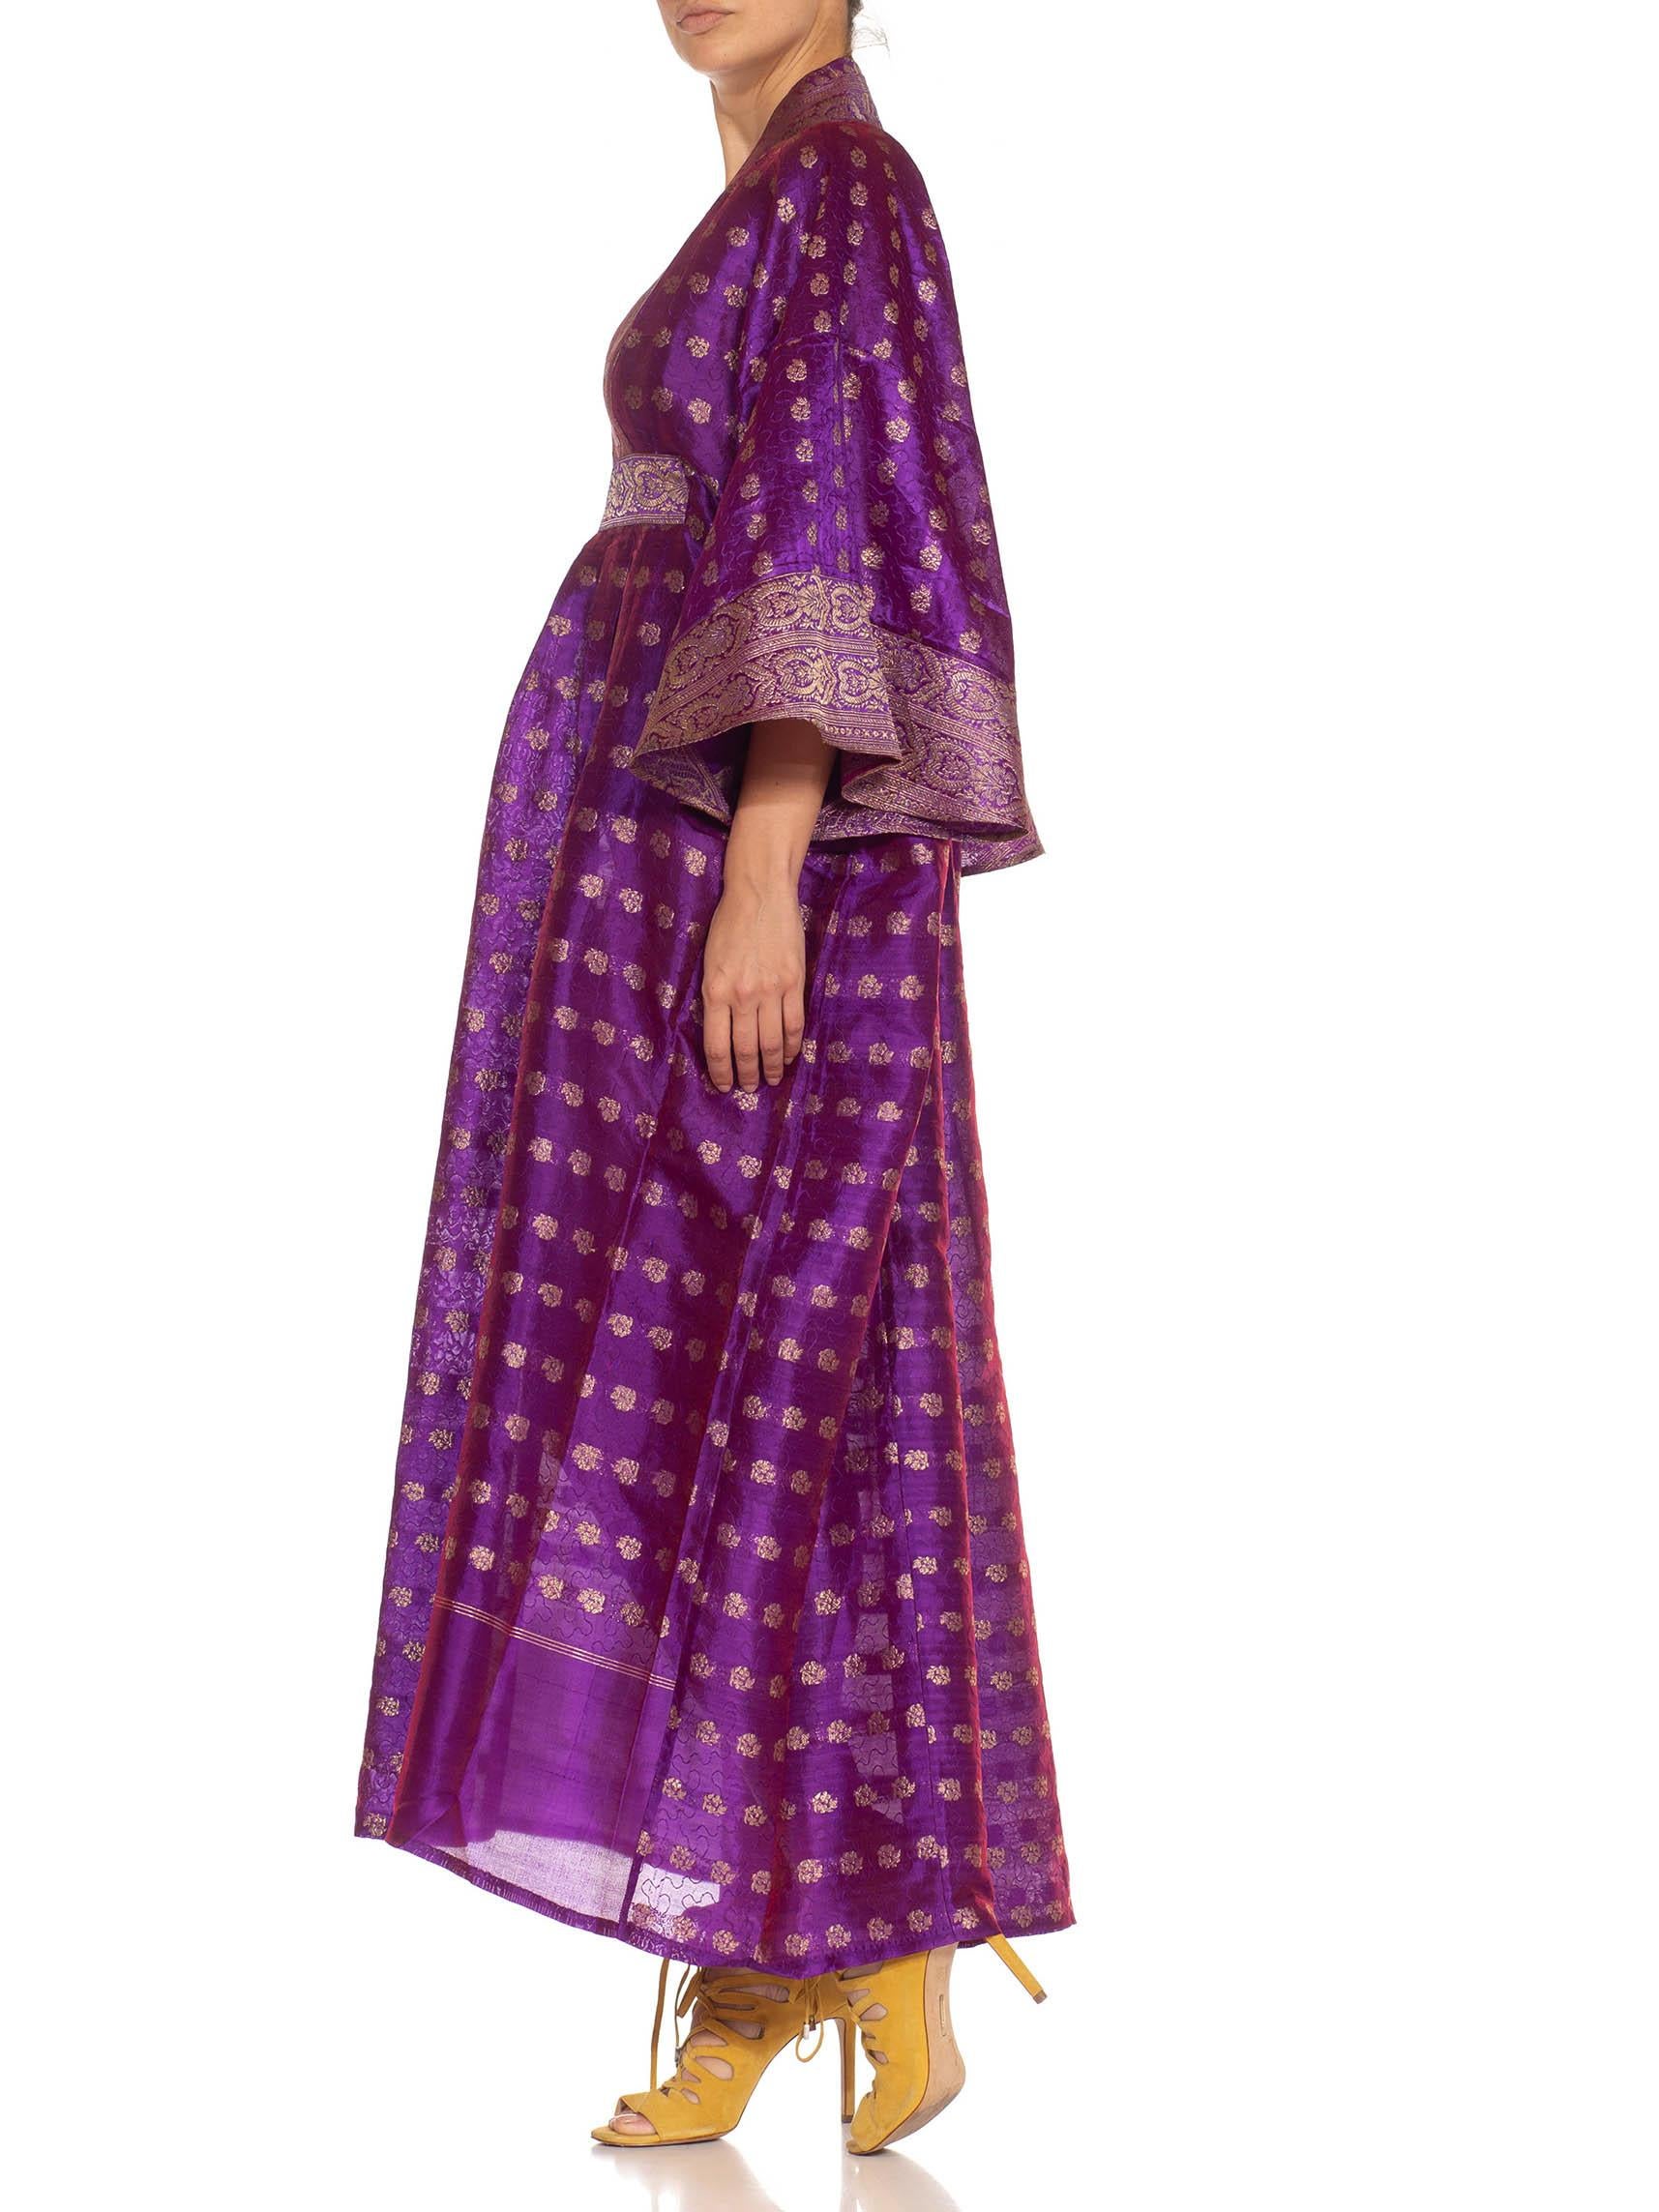 MORPHEW COLLECTION Purple & Gold Silk Kaftan Made From Vintage Saris In Excellent Condition For Sale In New York, NY